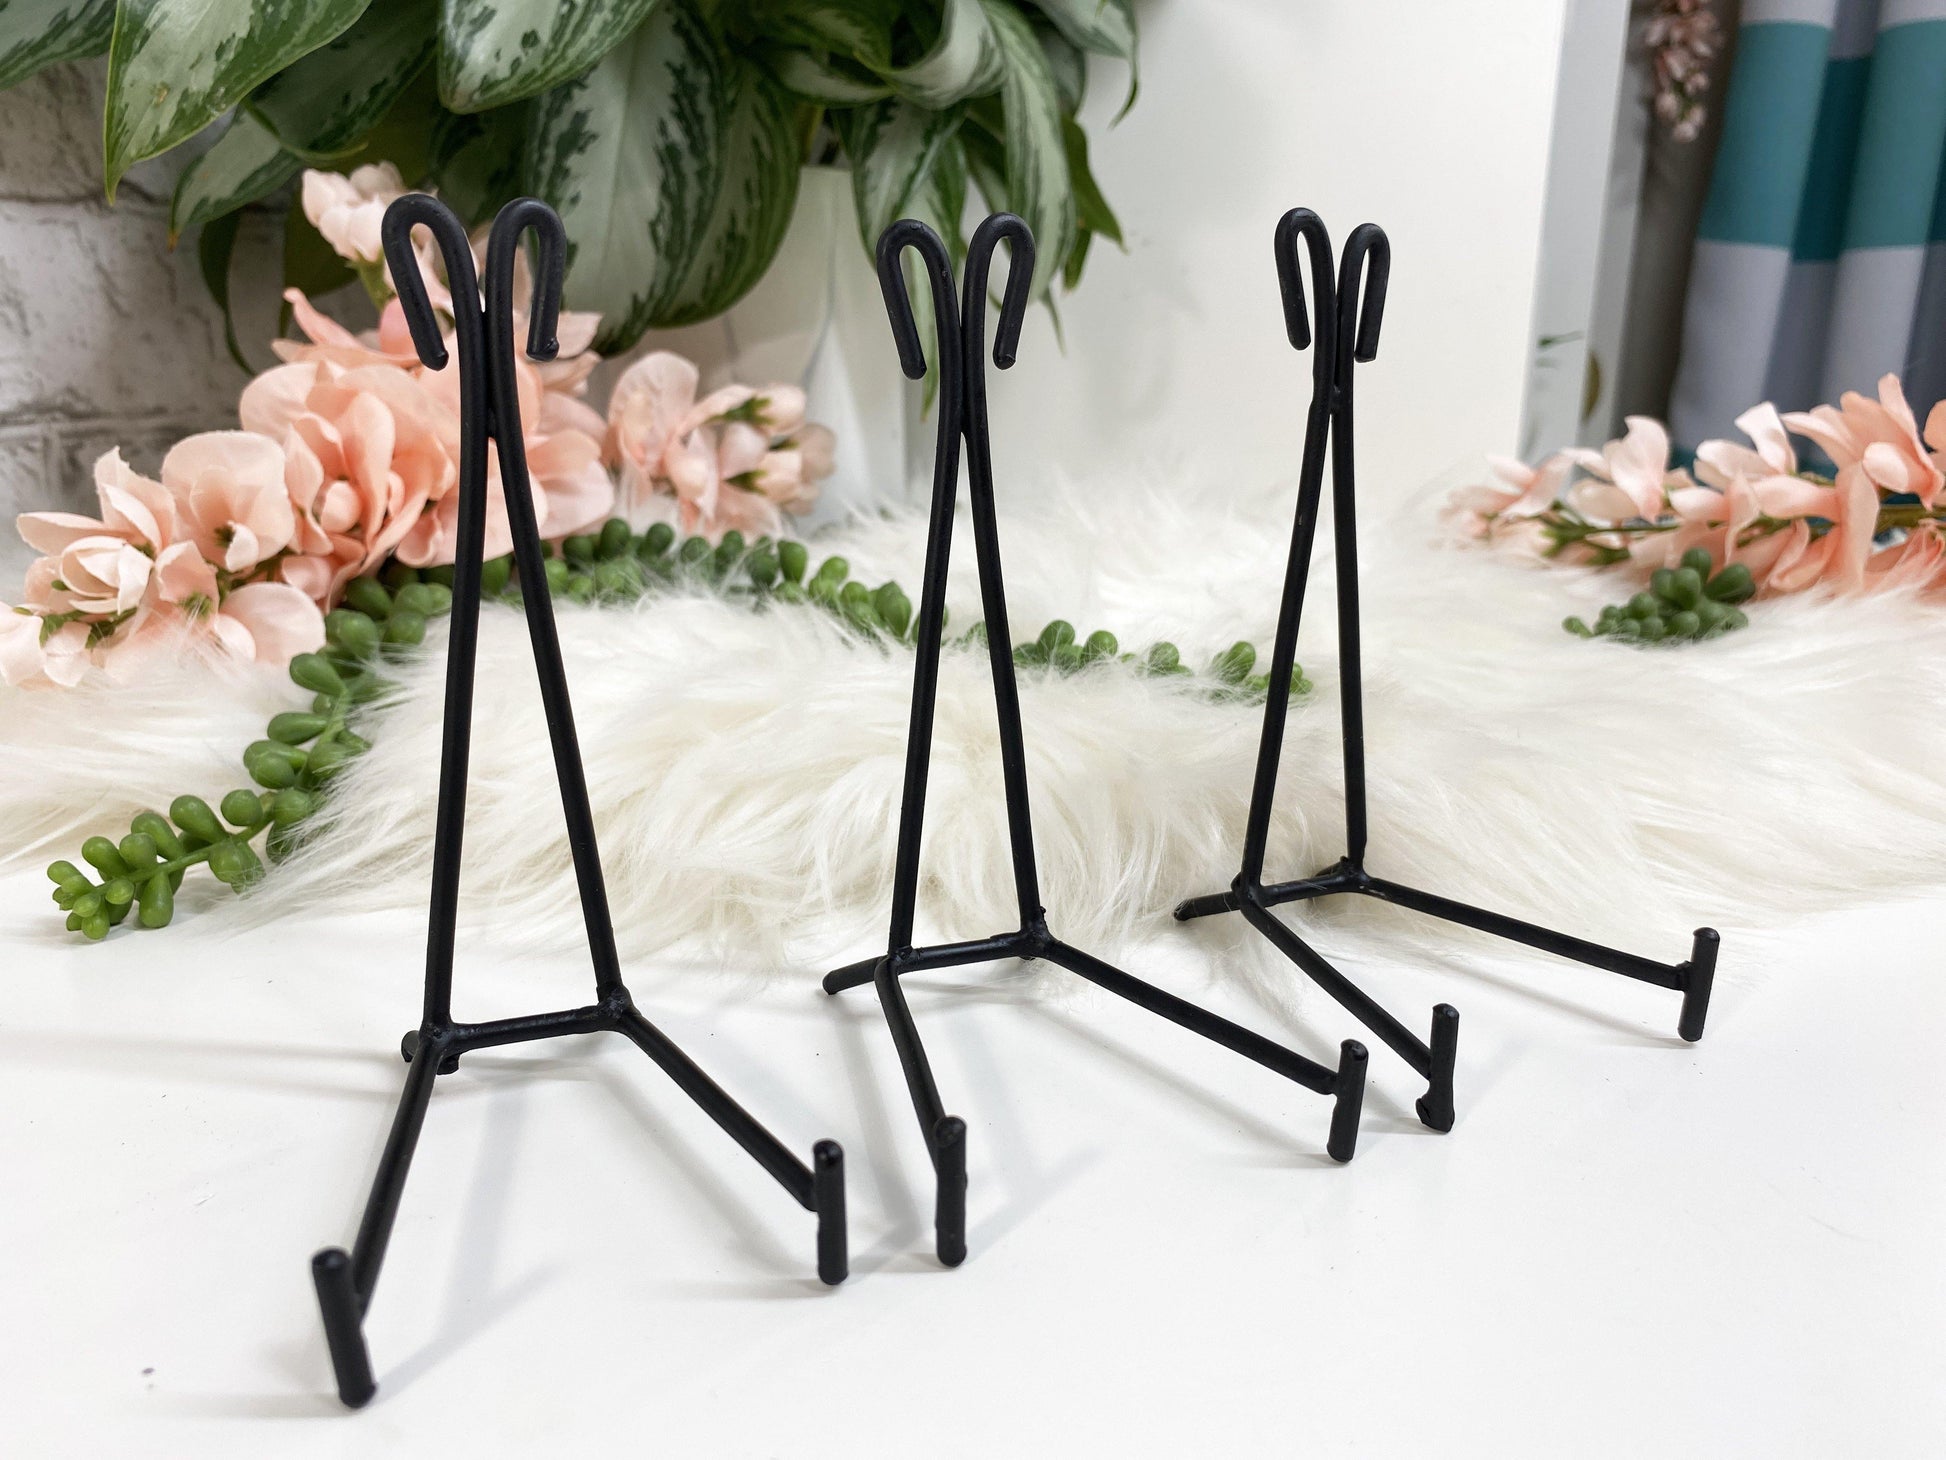 Easel metal display stands. These simple metal stands are perfect for propping up slabs or display crystals that usually just sit flat.